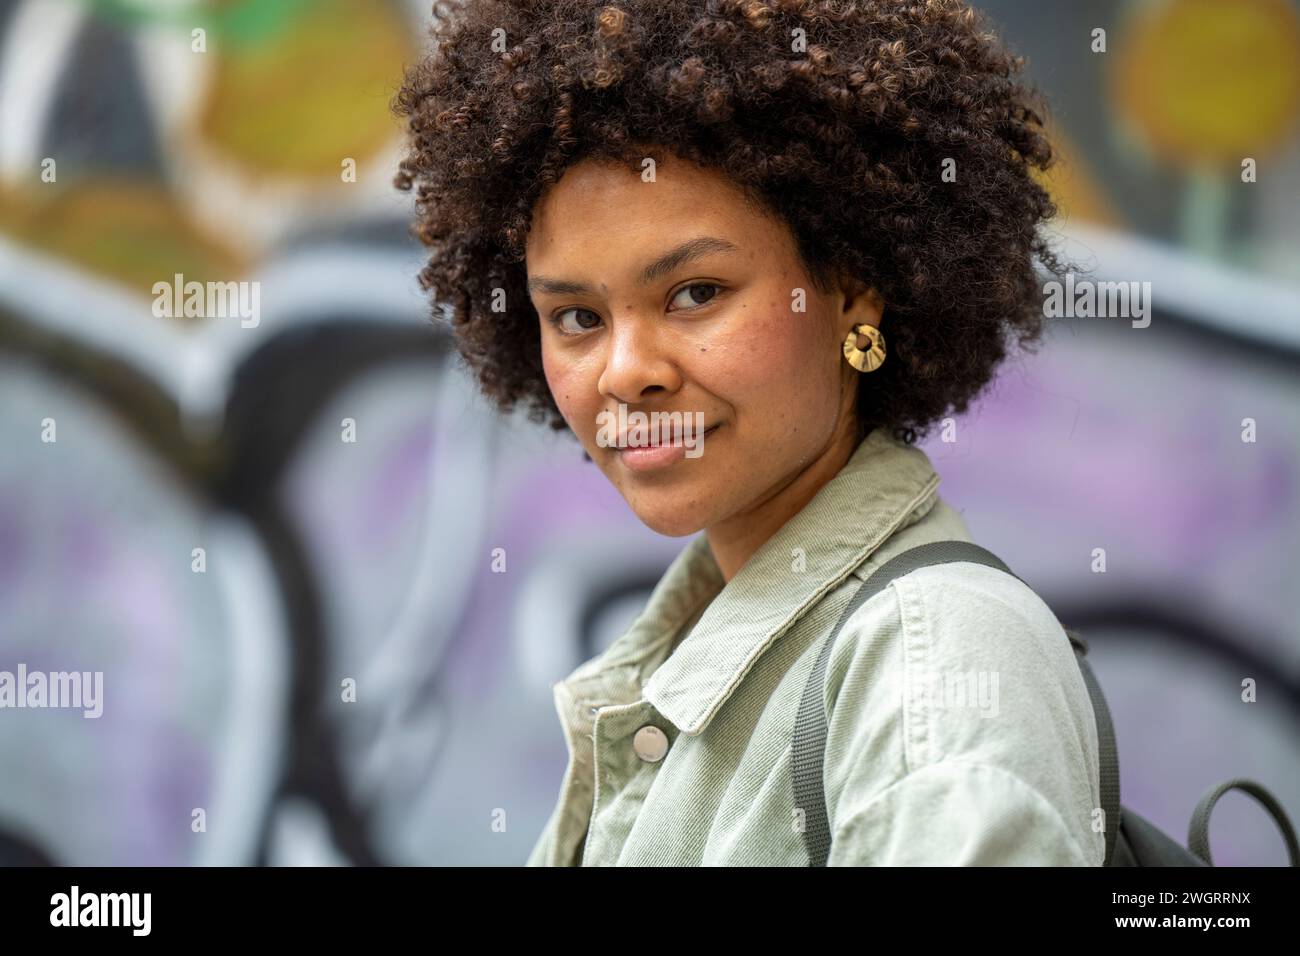 NTrendy young mixed race African woman walking through town happy. Stock Photo